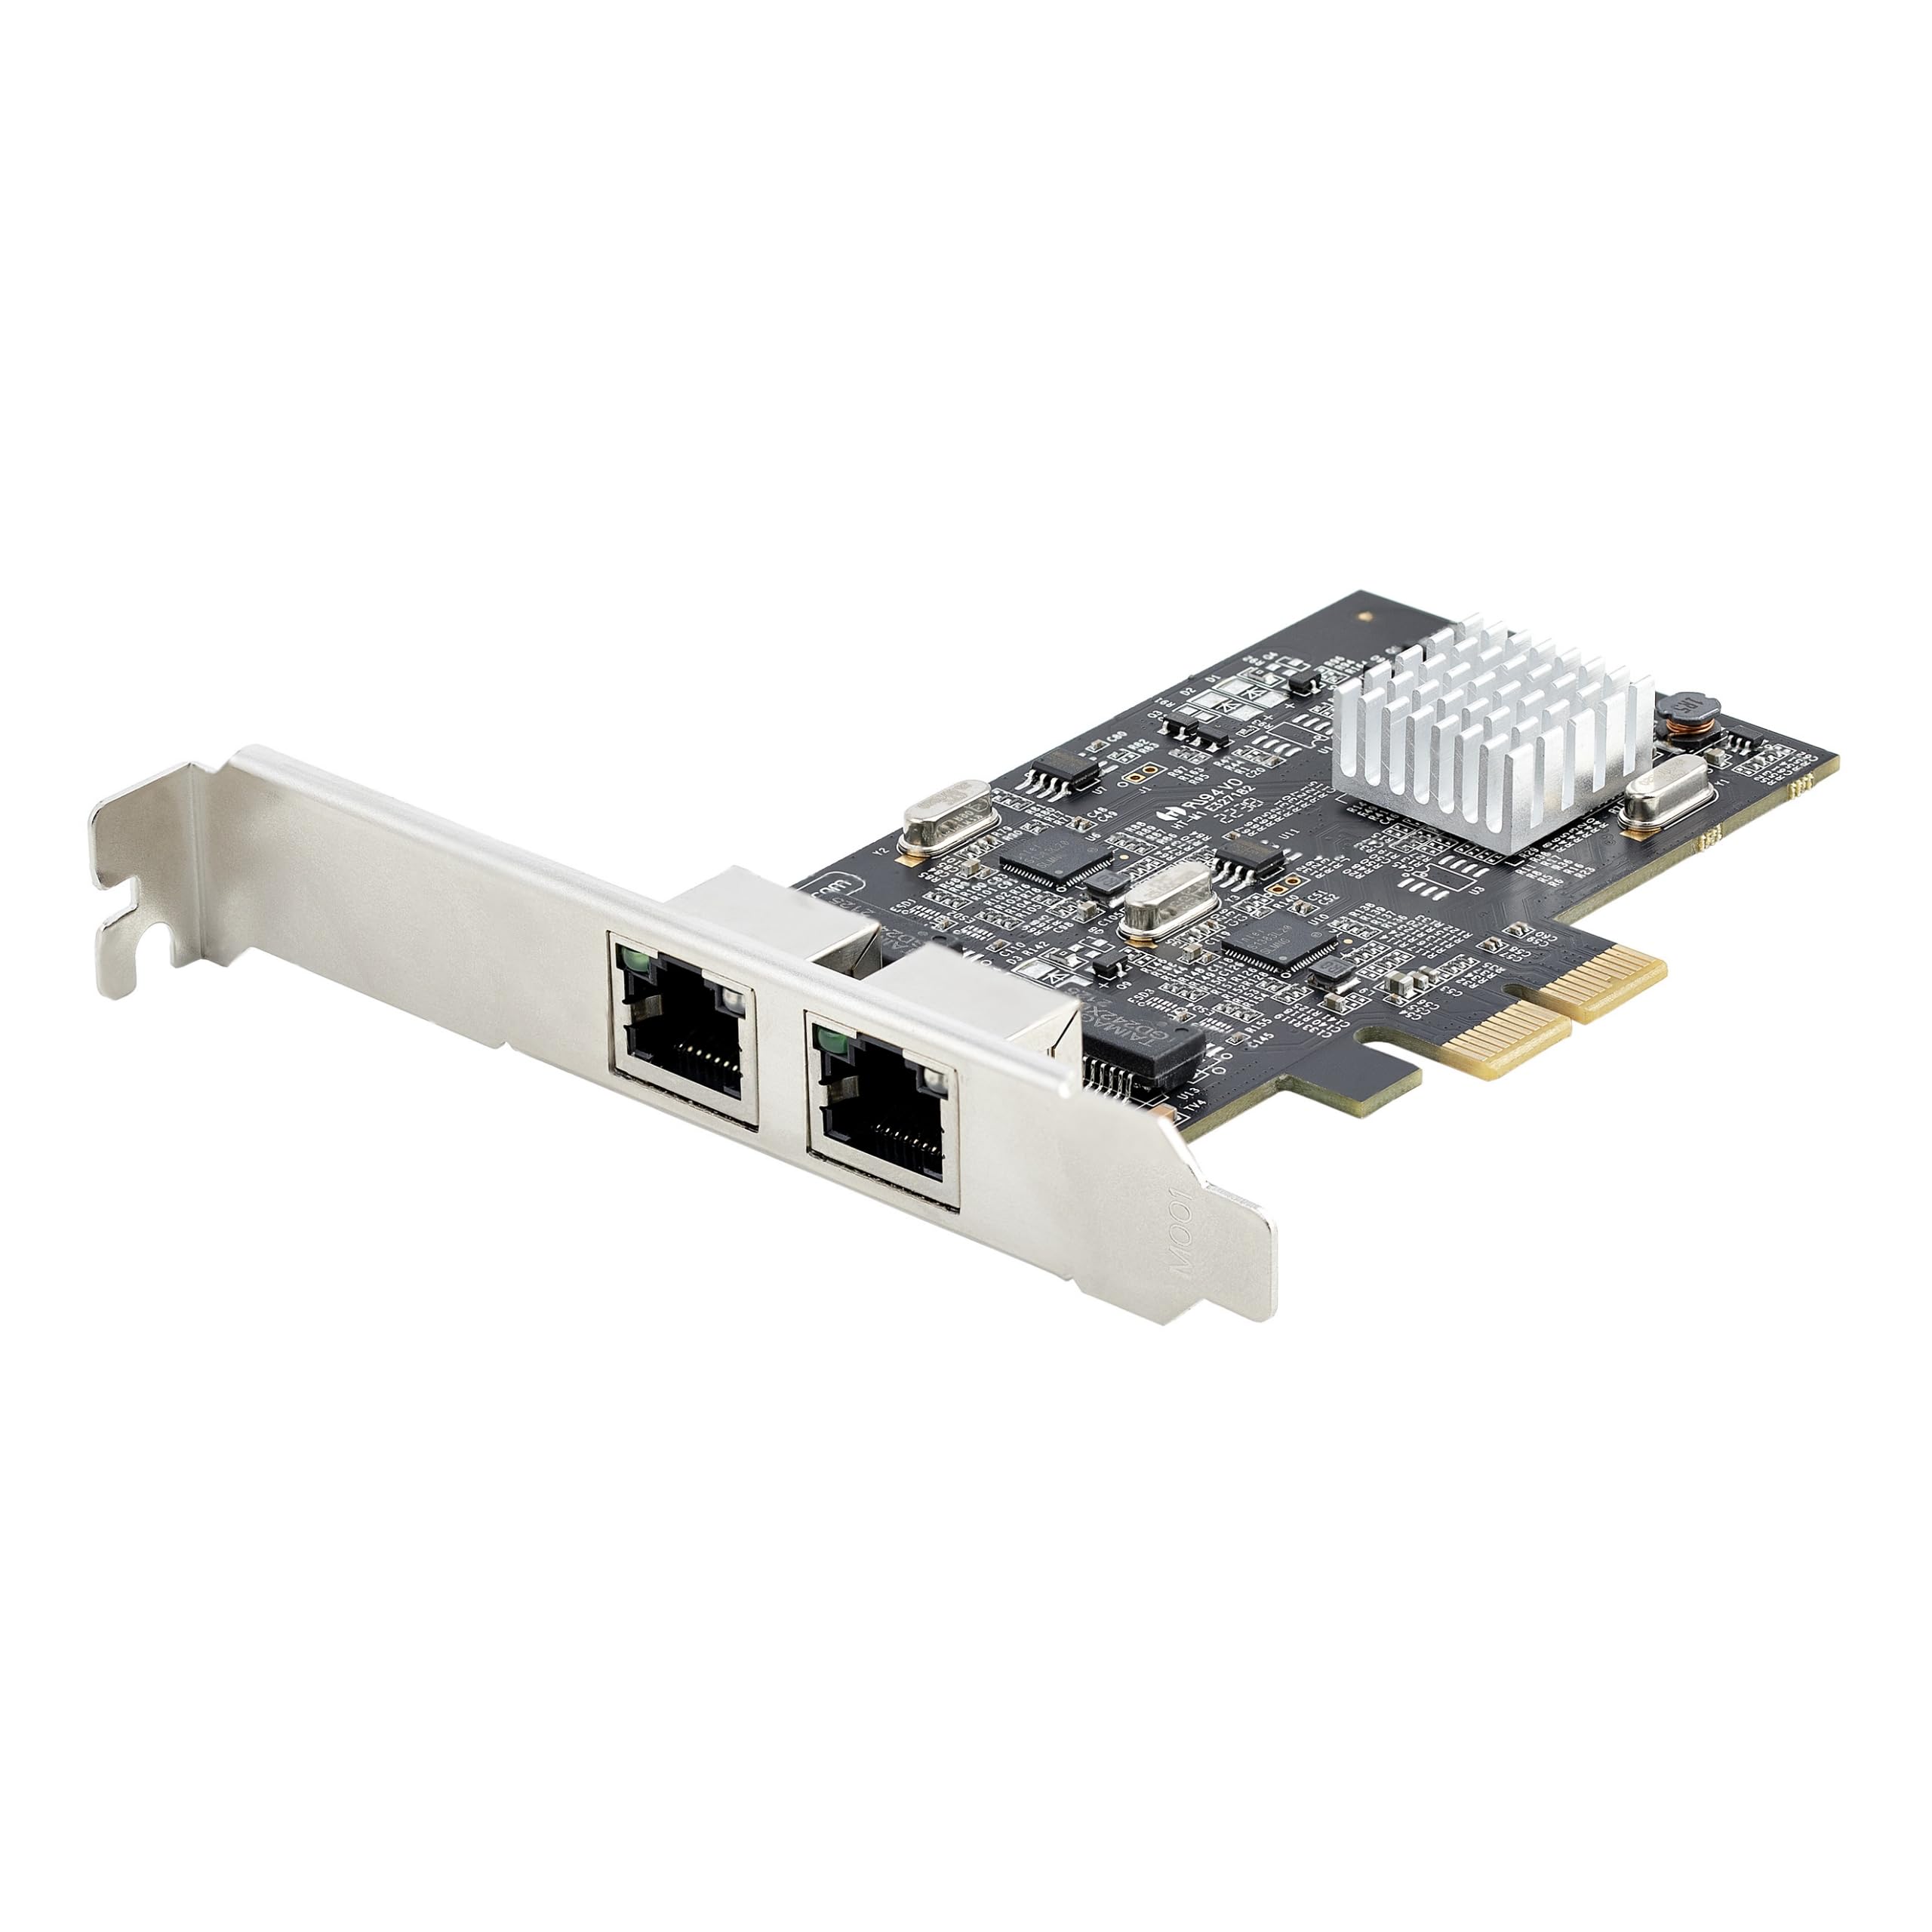 2-PORT 2.5G PCIE NETWORK CARD -